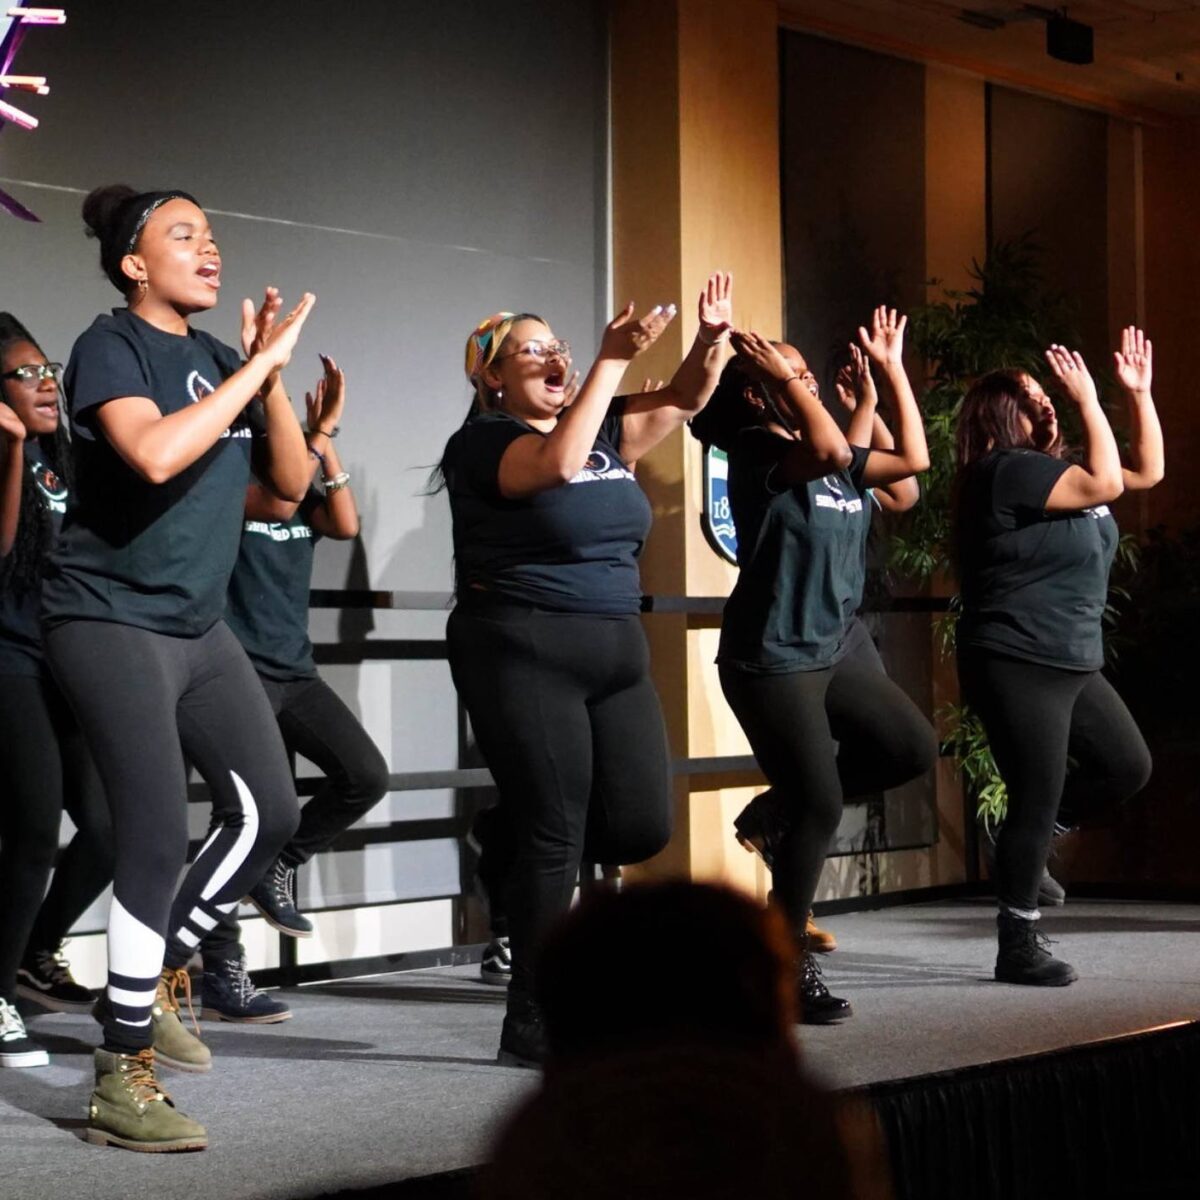 Soul Food Step students dancing on stage in the Champlain Room